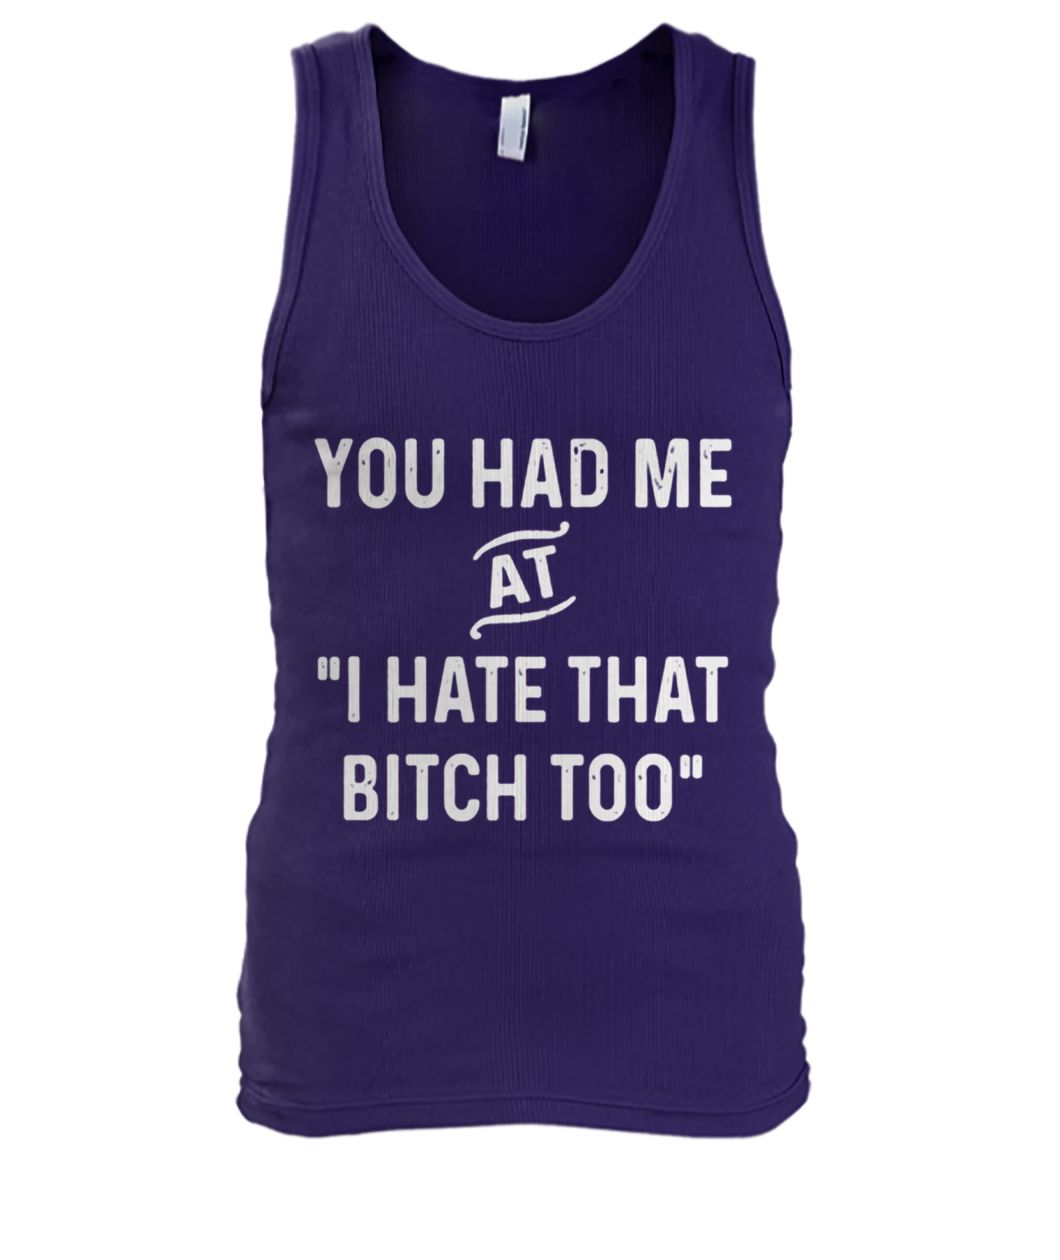 You had me at I hate that men's tank top